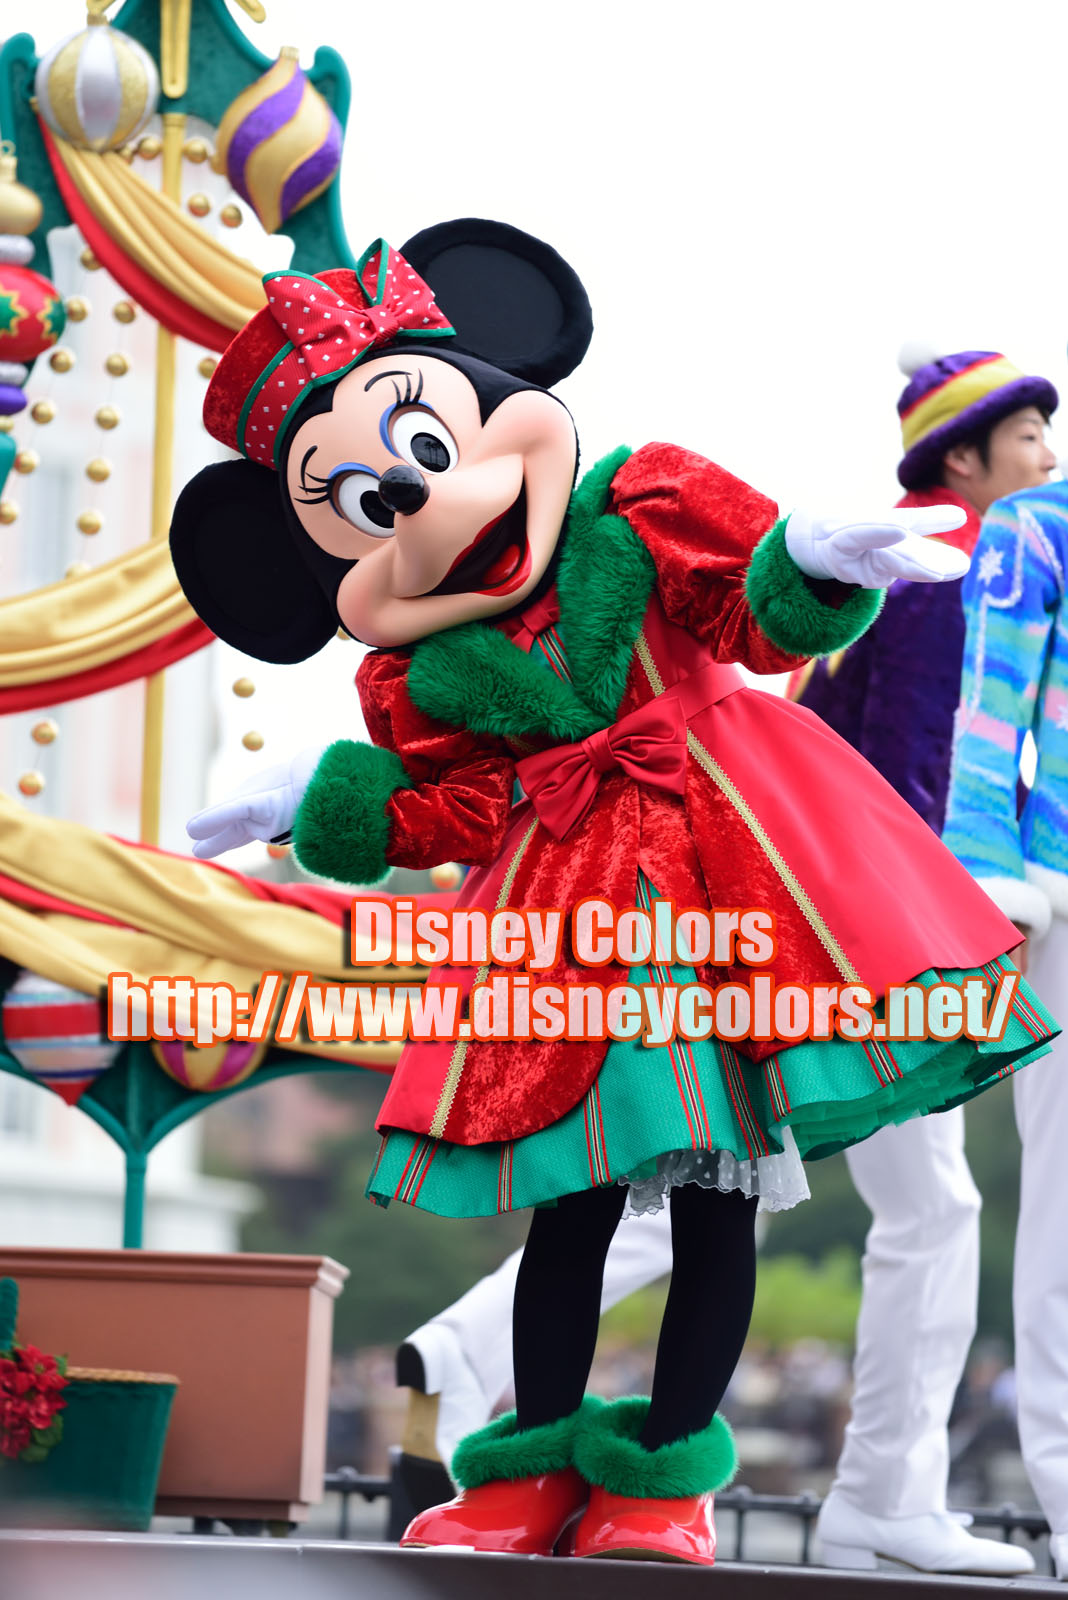 Tds パーフェクト クリスマス17 鑑賞ガイド Disney Colors Event Guide